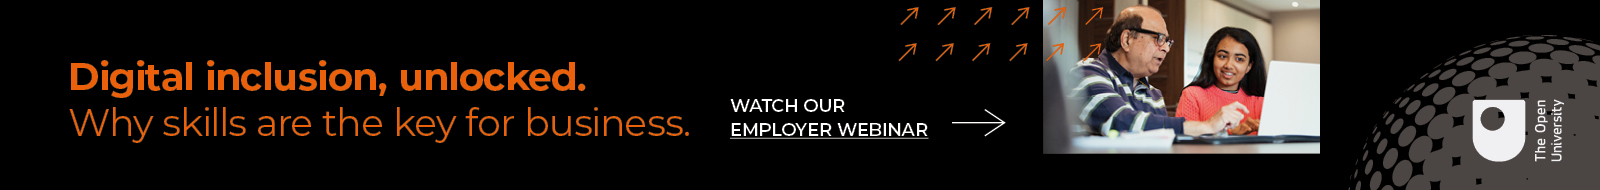 Digital inclusion, unlocked. Why skills are the key for business. Watch our employer webinar.